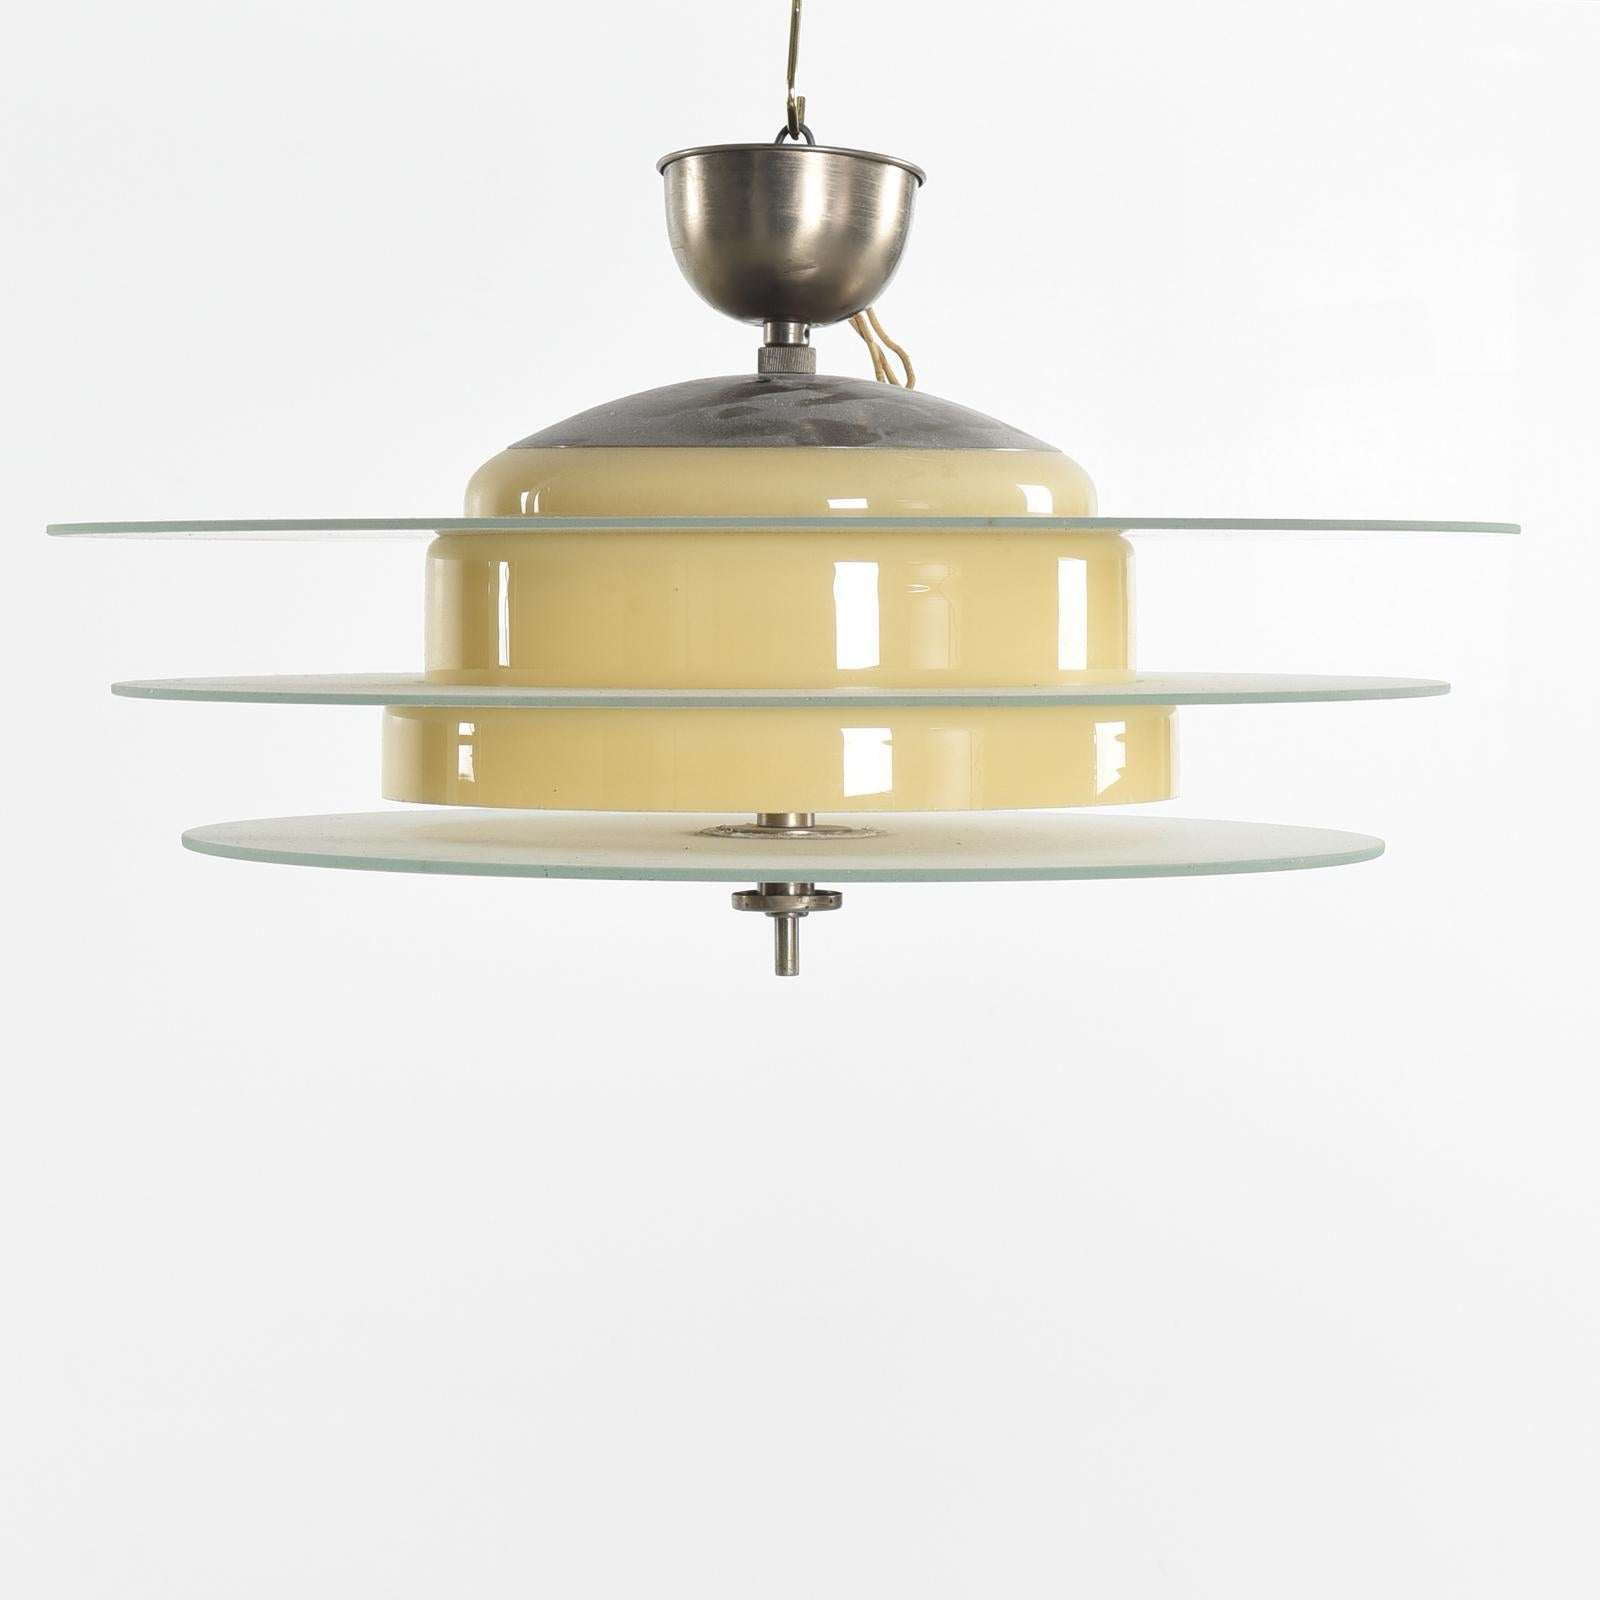 Art Deco chandelier with a nickel-plated brass frame, glass shade. Fitted with 3 E26/E27 porcelain sockets up to 100watts each. Designed by Harald Notini and manufactured in Sweden by Böhlmarks Lampfabrik in the 1930s. 
The length will be customized